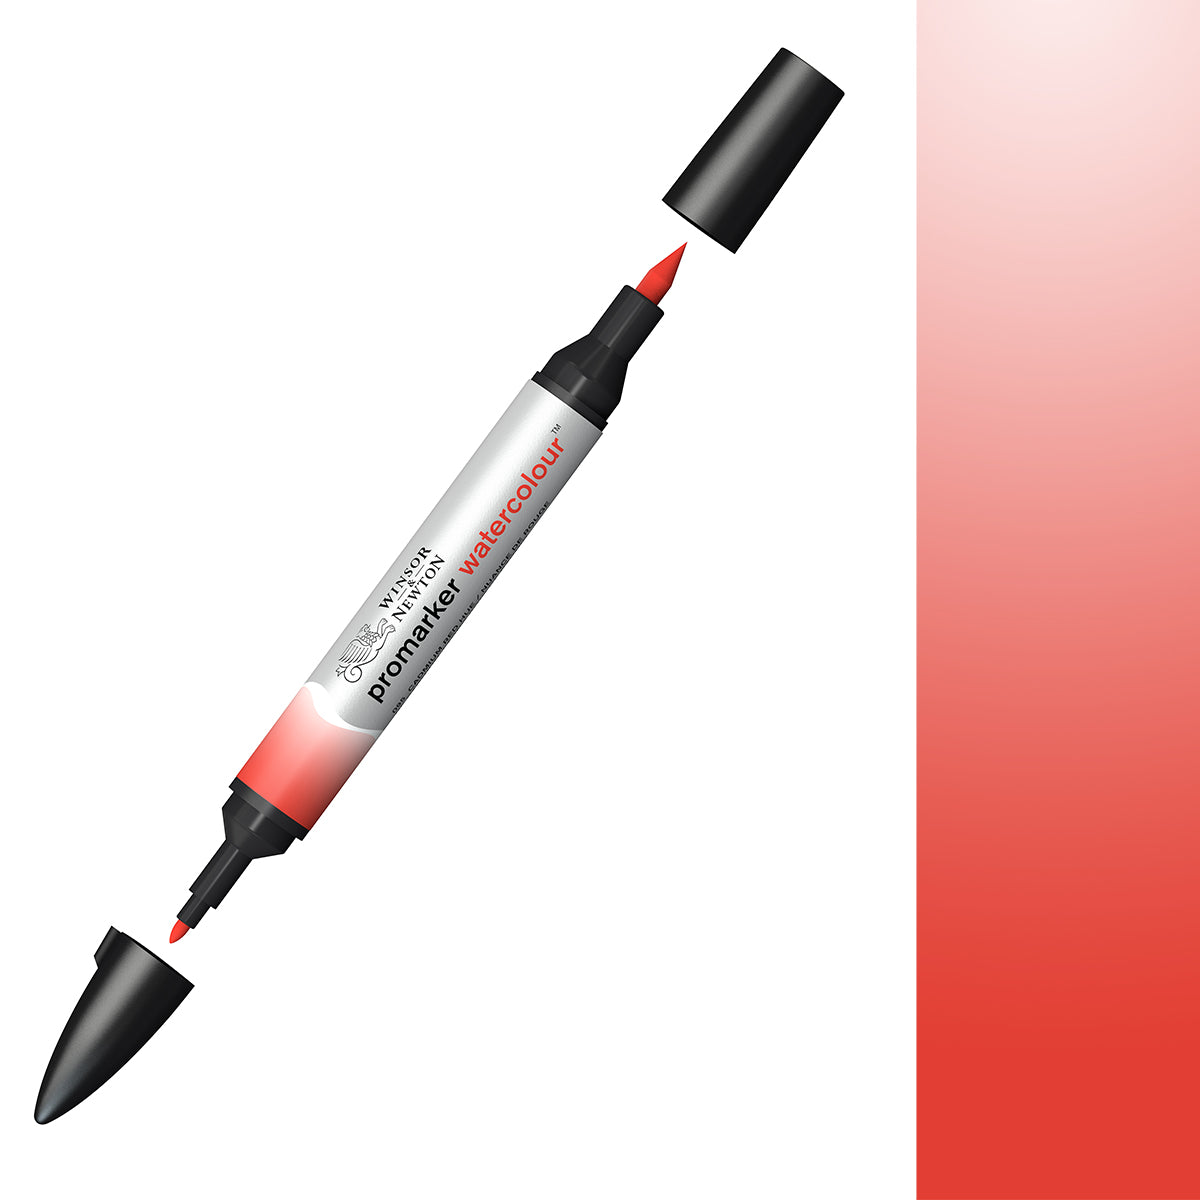 Winsor & Newton - Promarker Watercolor - CAD Red Hue 095